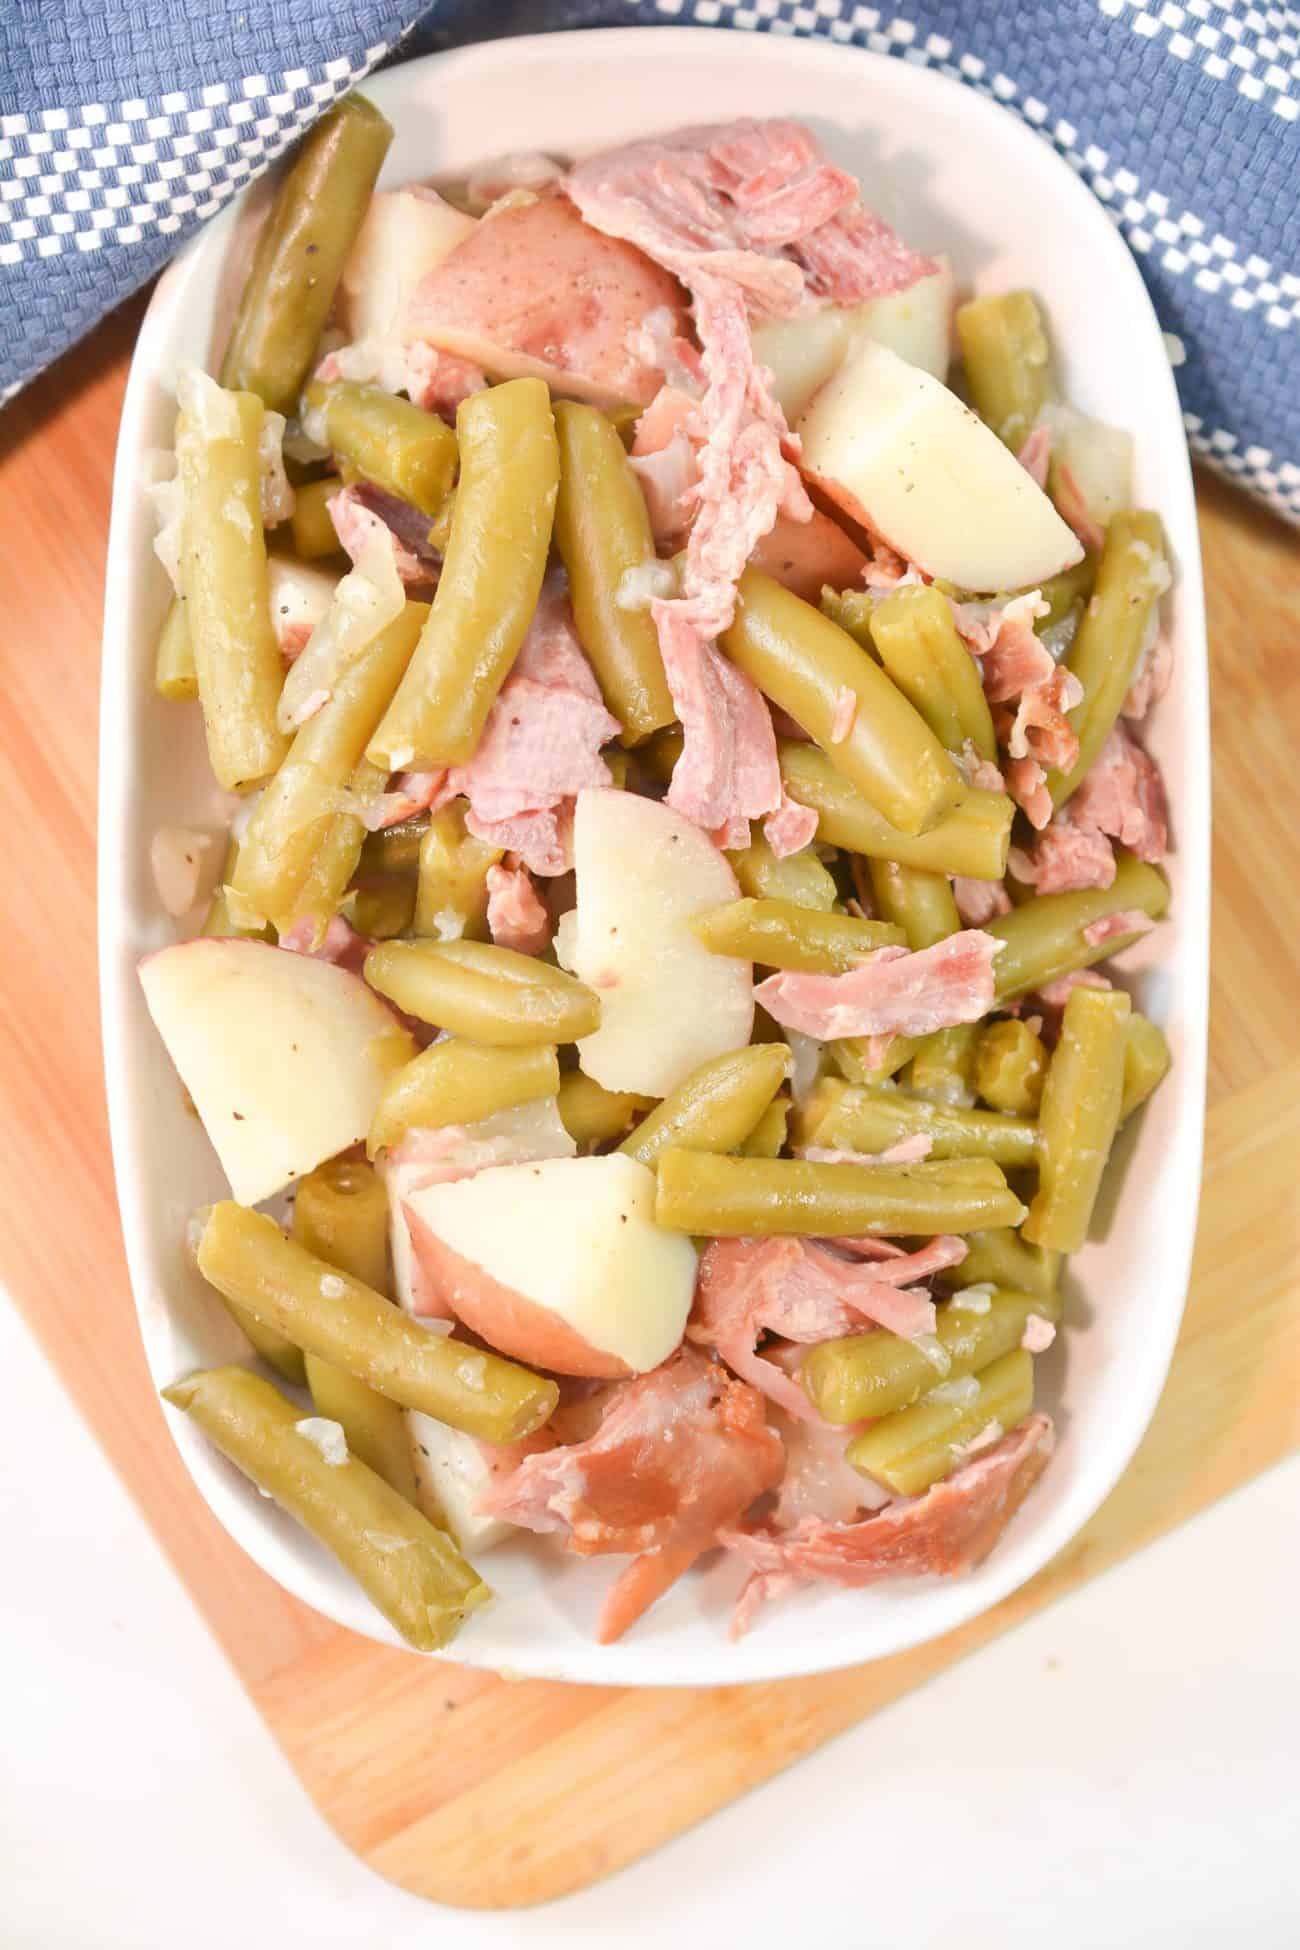 Country Style Green Beans with Red Potatoes